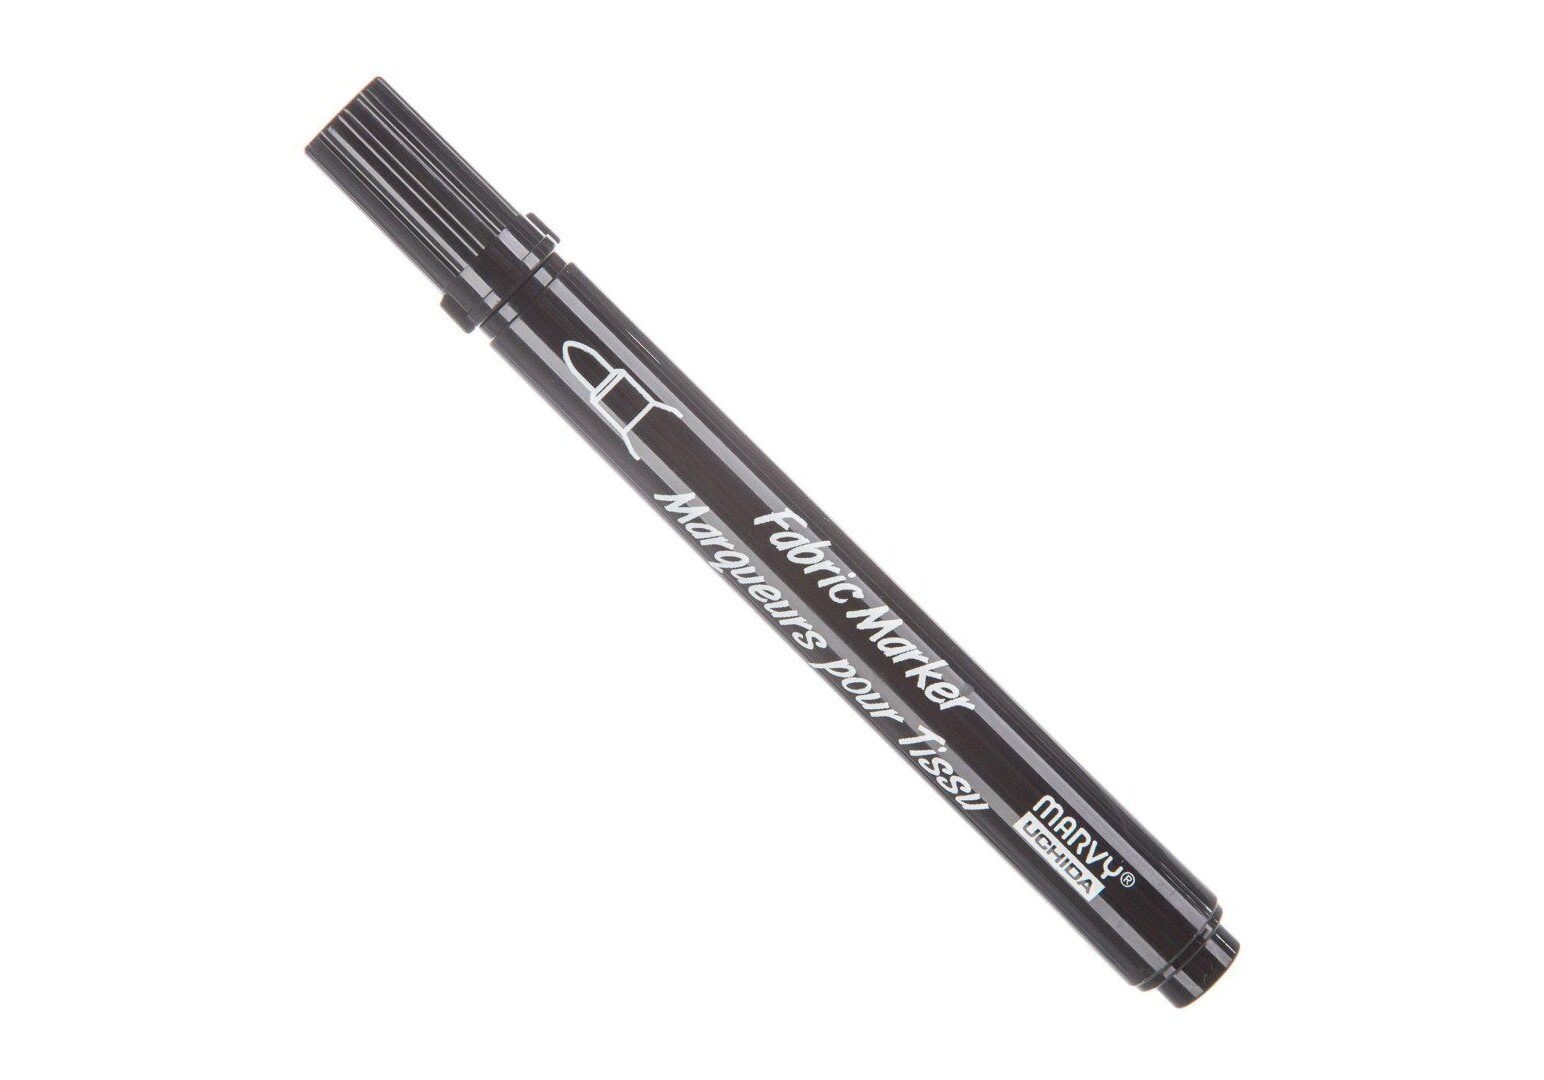 A black pen with white writing on it.